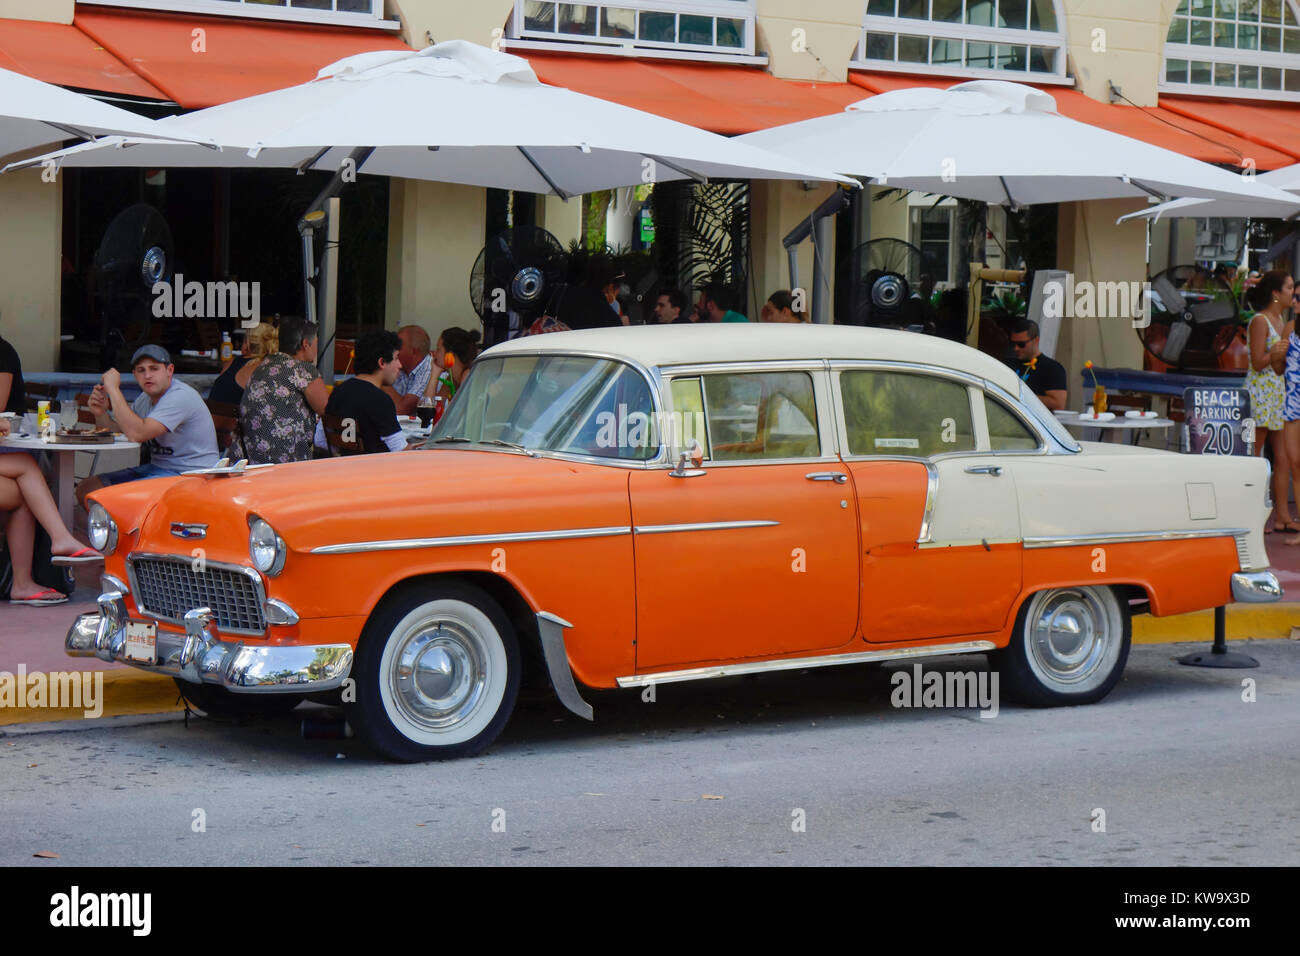 Classic car in front of art deco hotel Edison on Ocean Drive in South Beach district of Miami Beach, Florida, USA Stock Photo